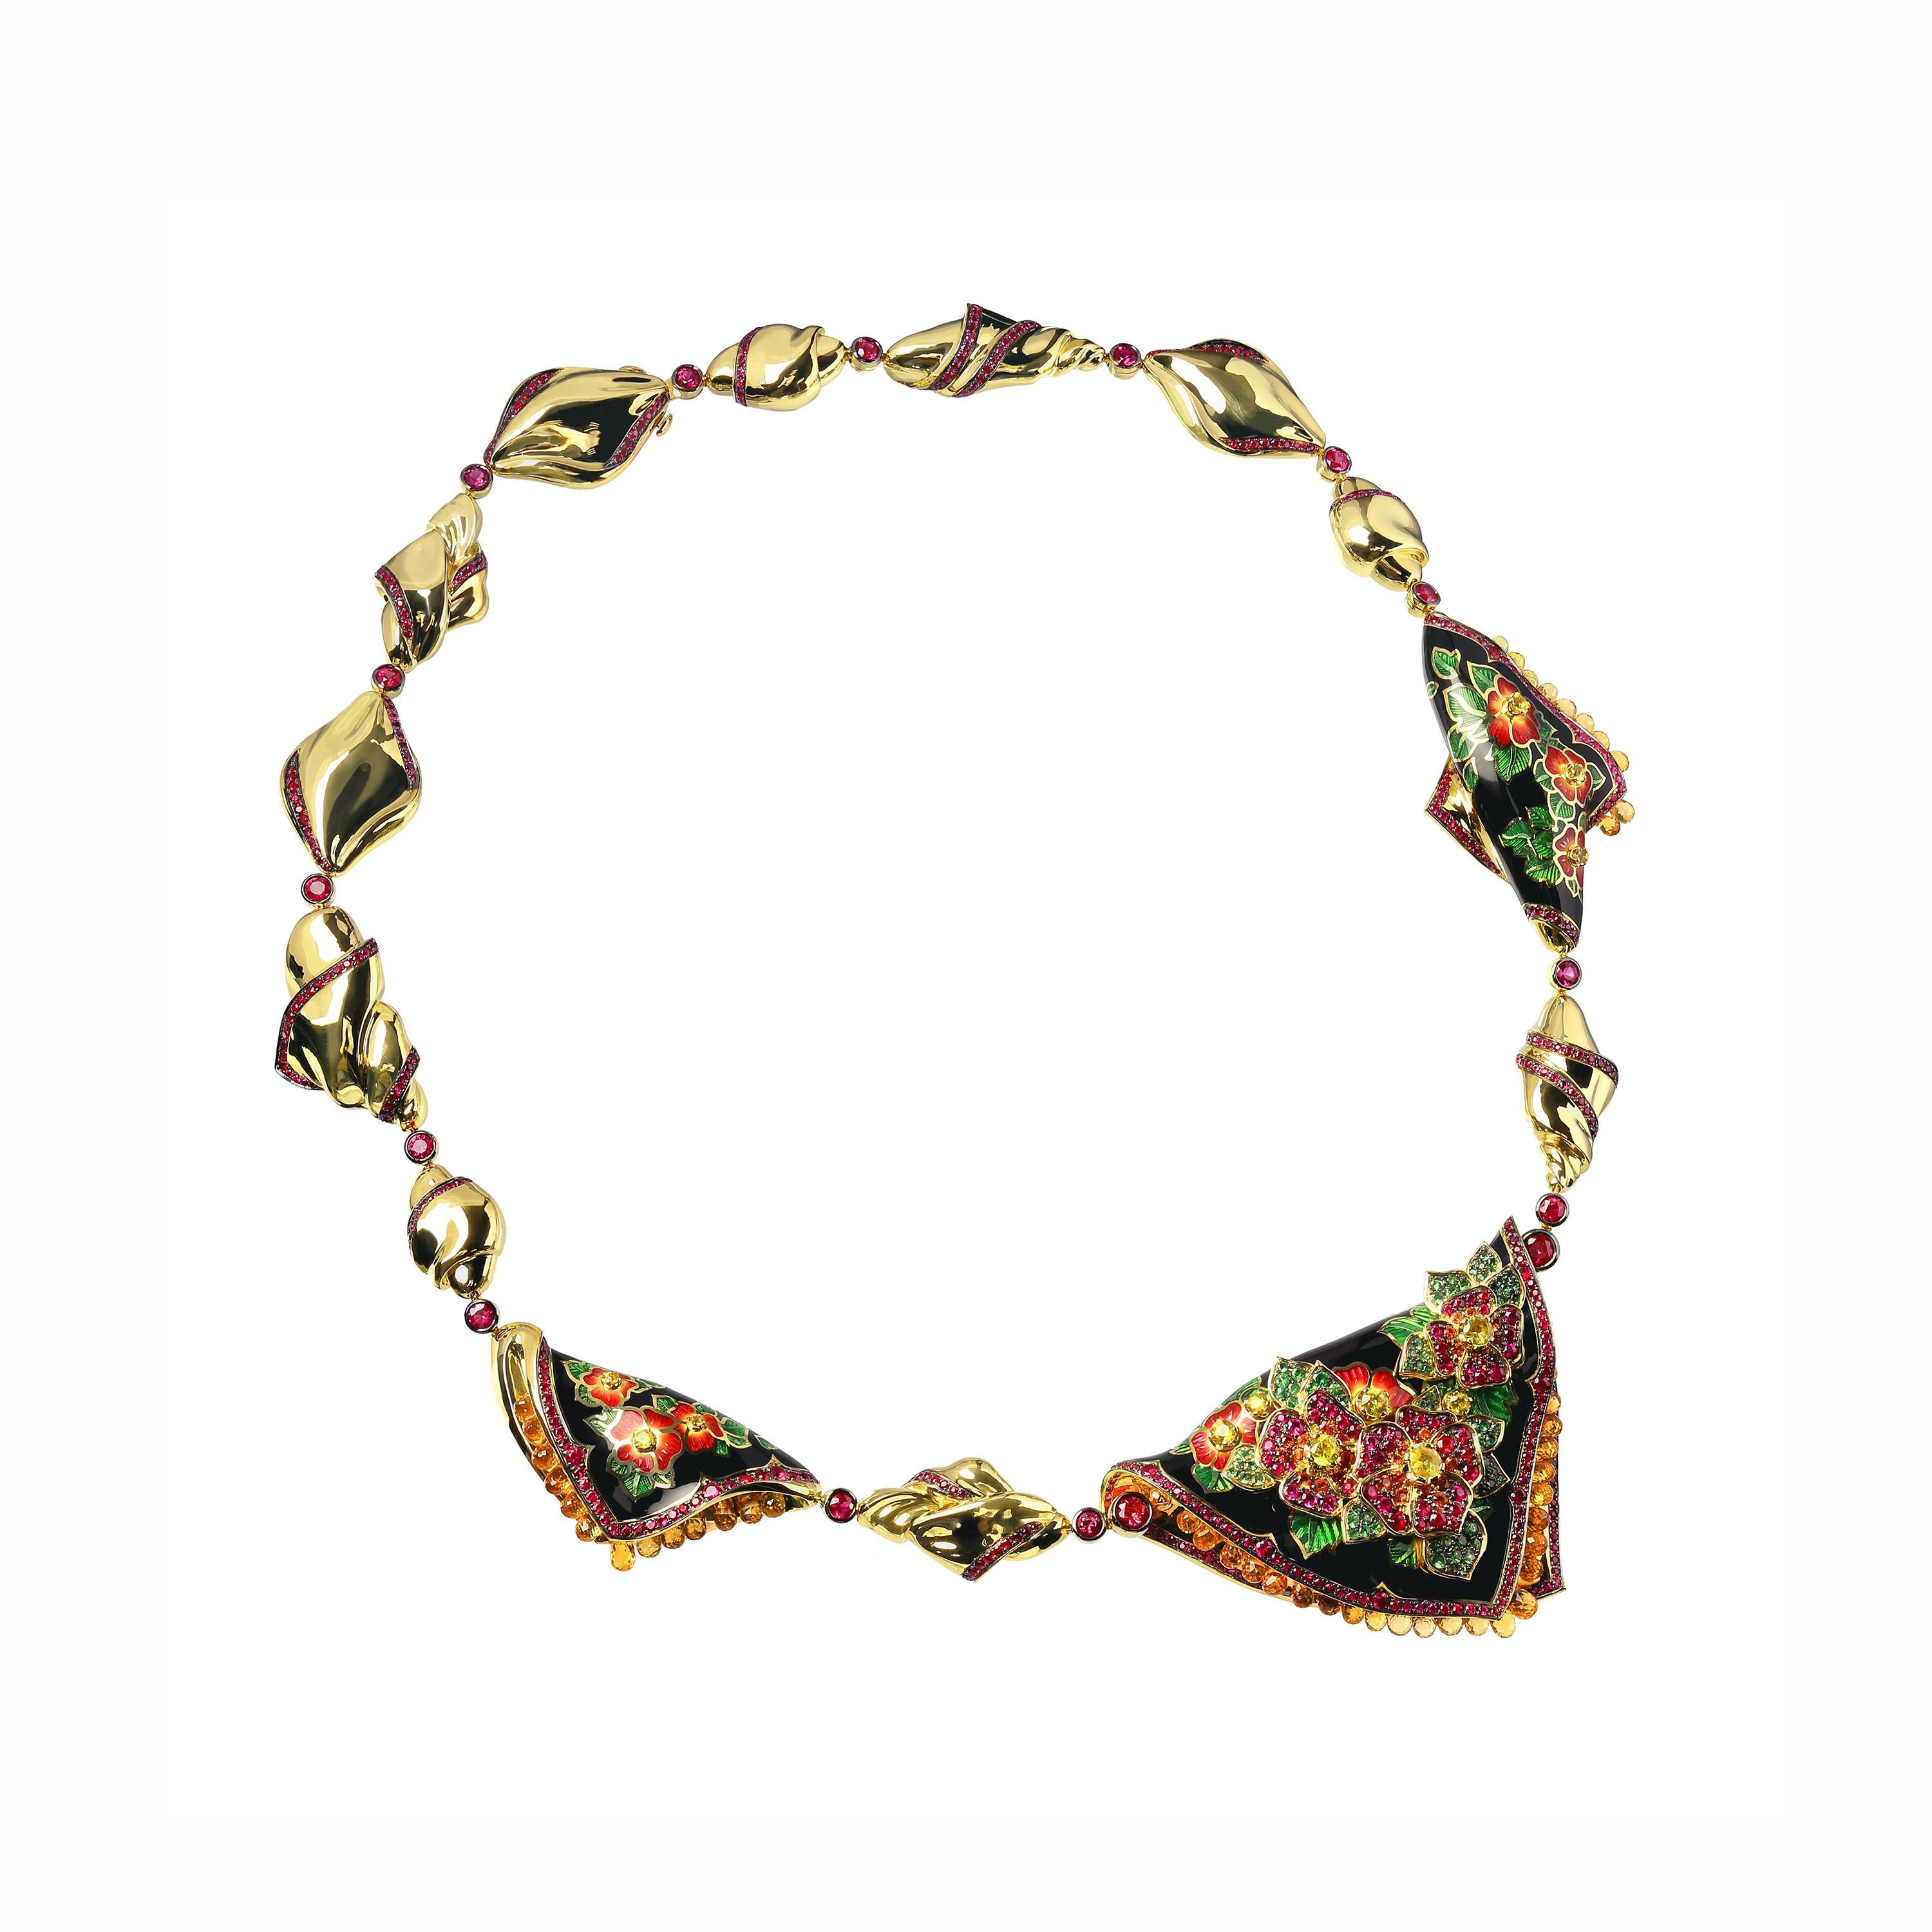 Sapphire Ruby Tsavorite Enamel A'la Russe Necklace
What do you know about Pavlovo Posad shawls? This is a large part of Russian culture, which originated in the 17th century. They are large patterned scarves, which are usually presented as a gift to